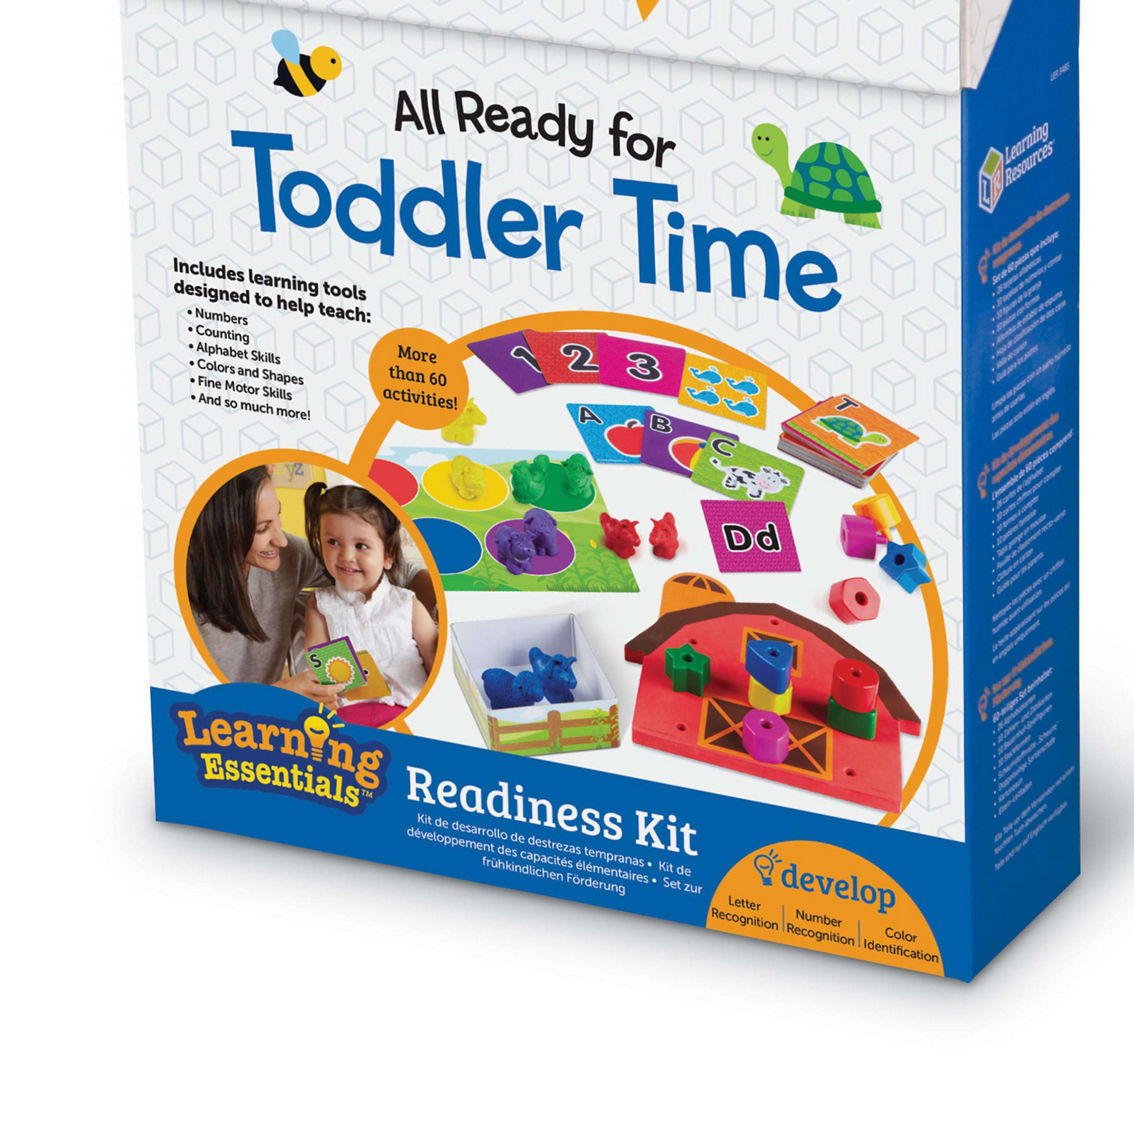 Learning Resources Learning Essentials - All Ready for Toddler Time Readiness Kit - Image 3 of 5